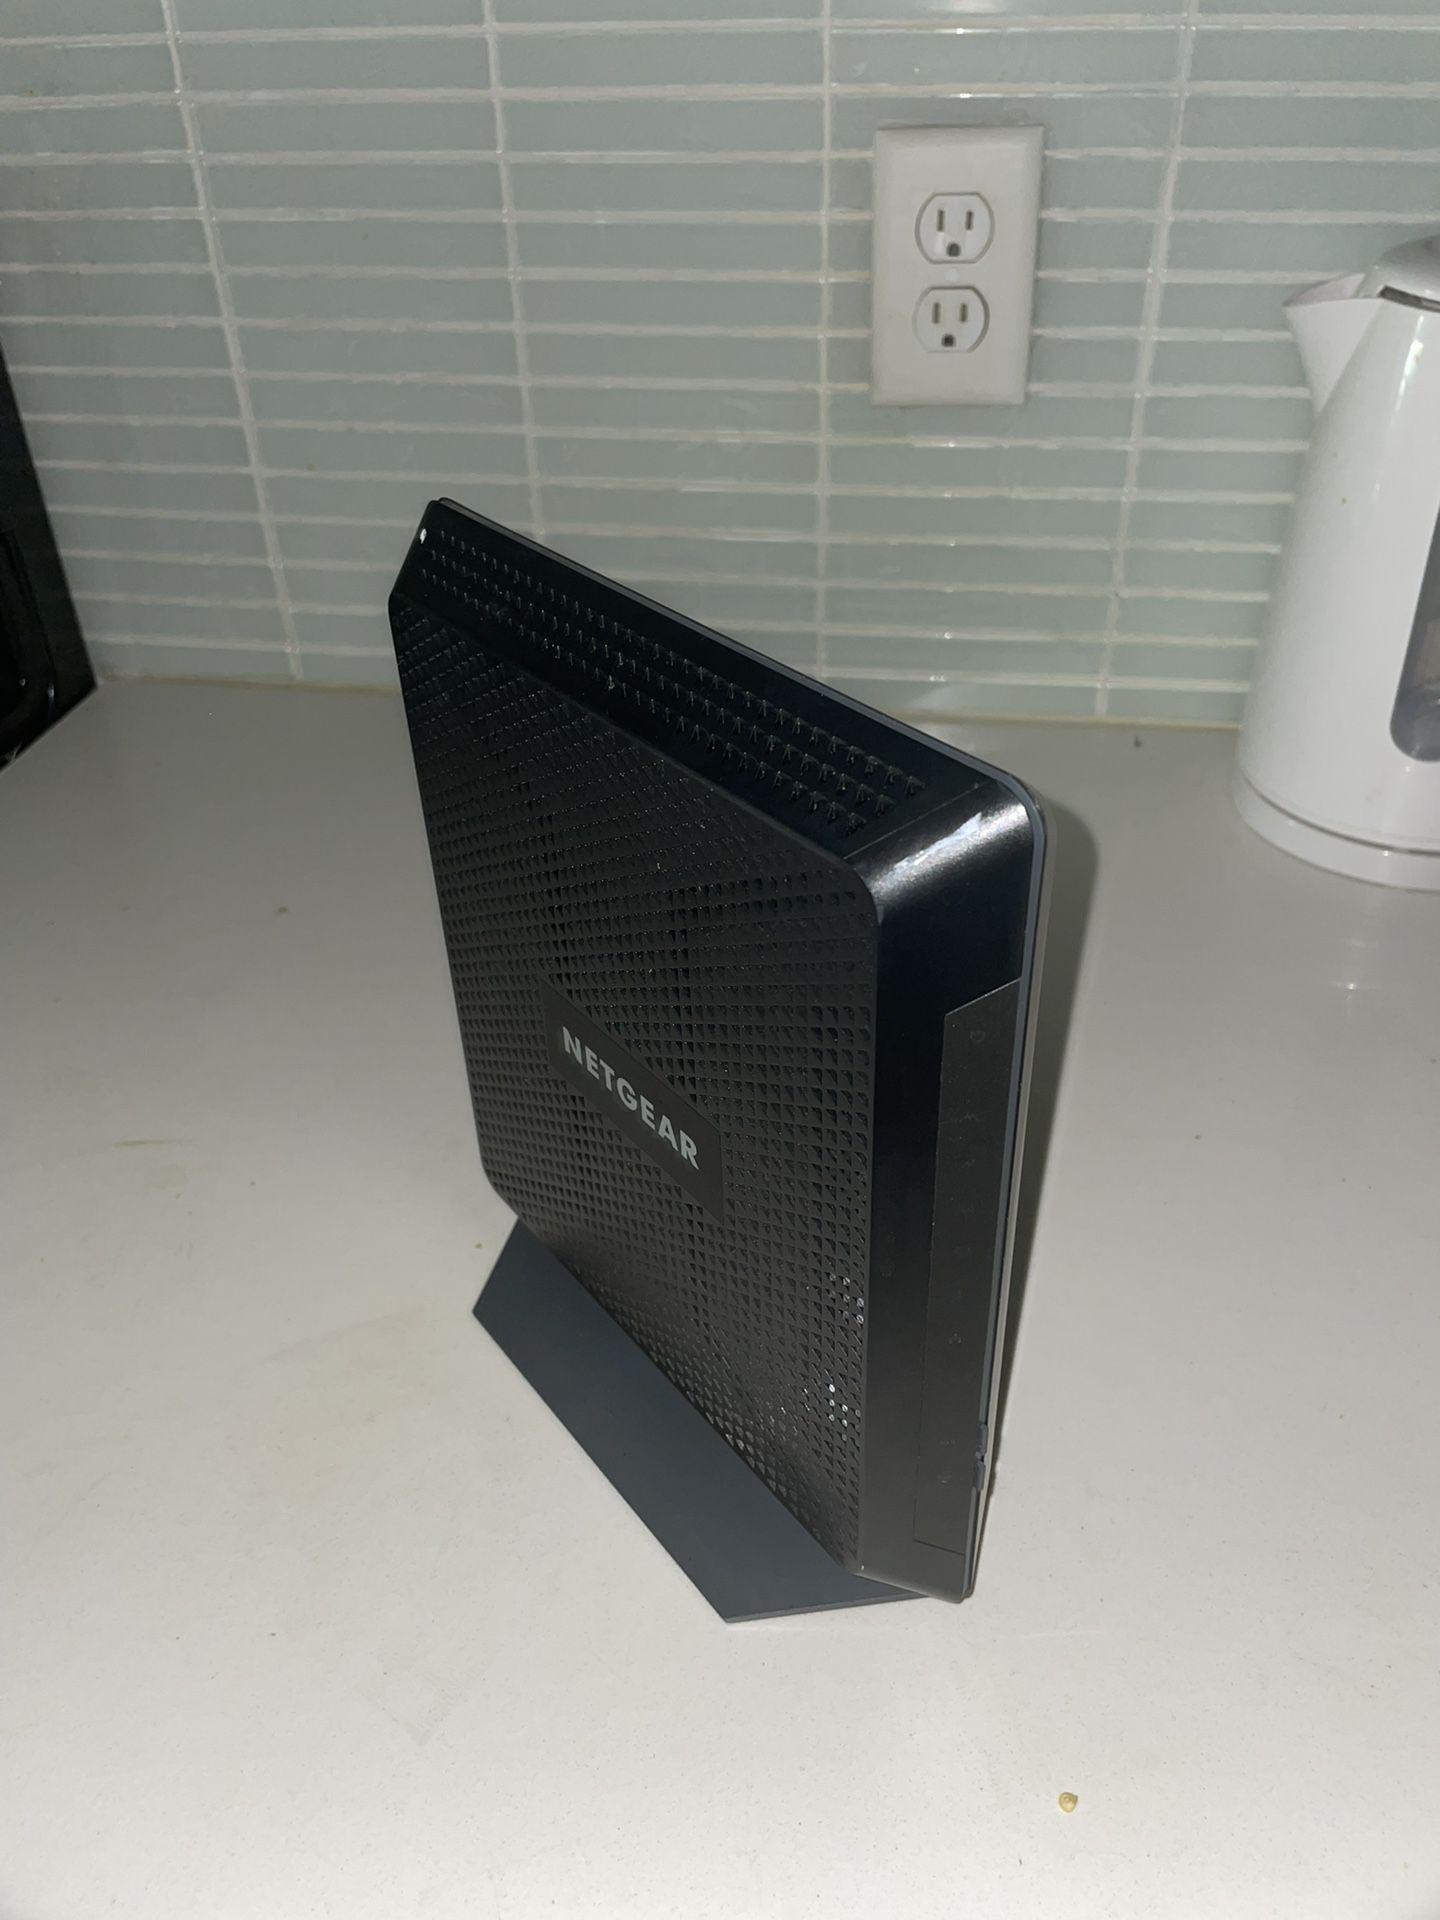 AC1900 Wifi Cable Modem Router